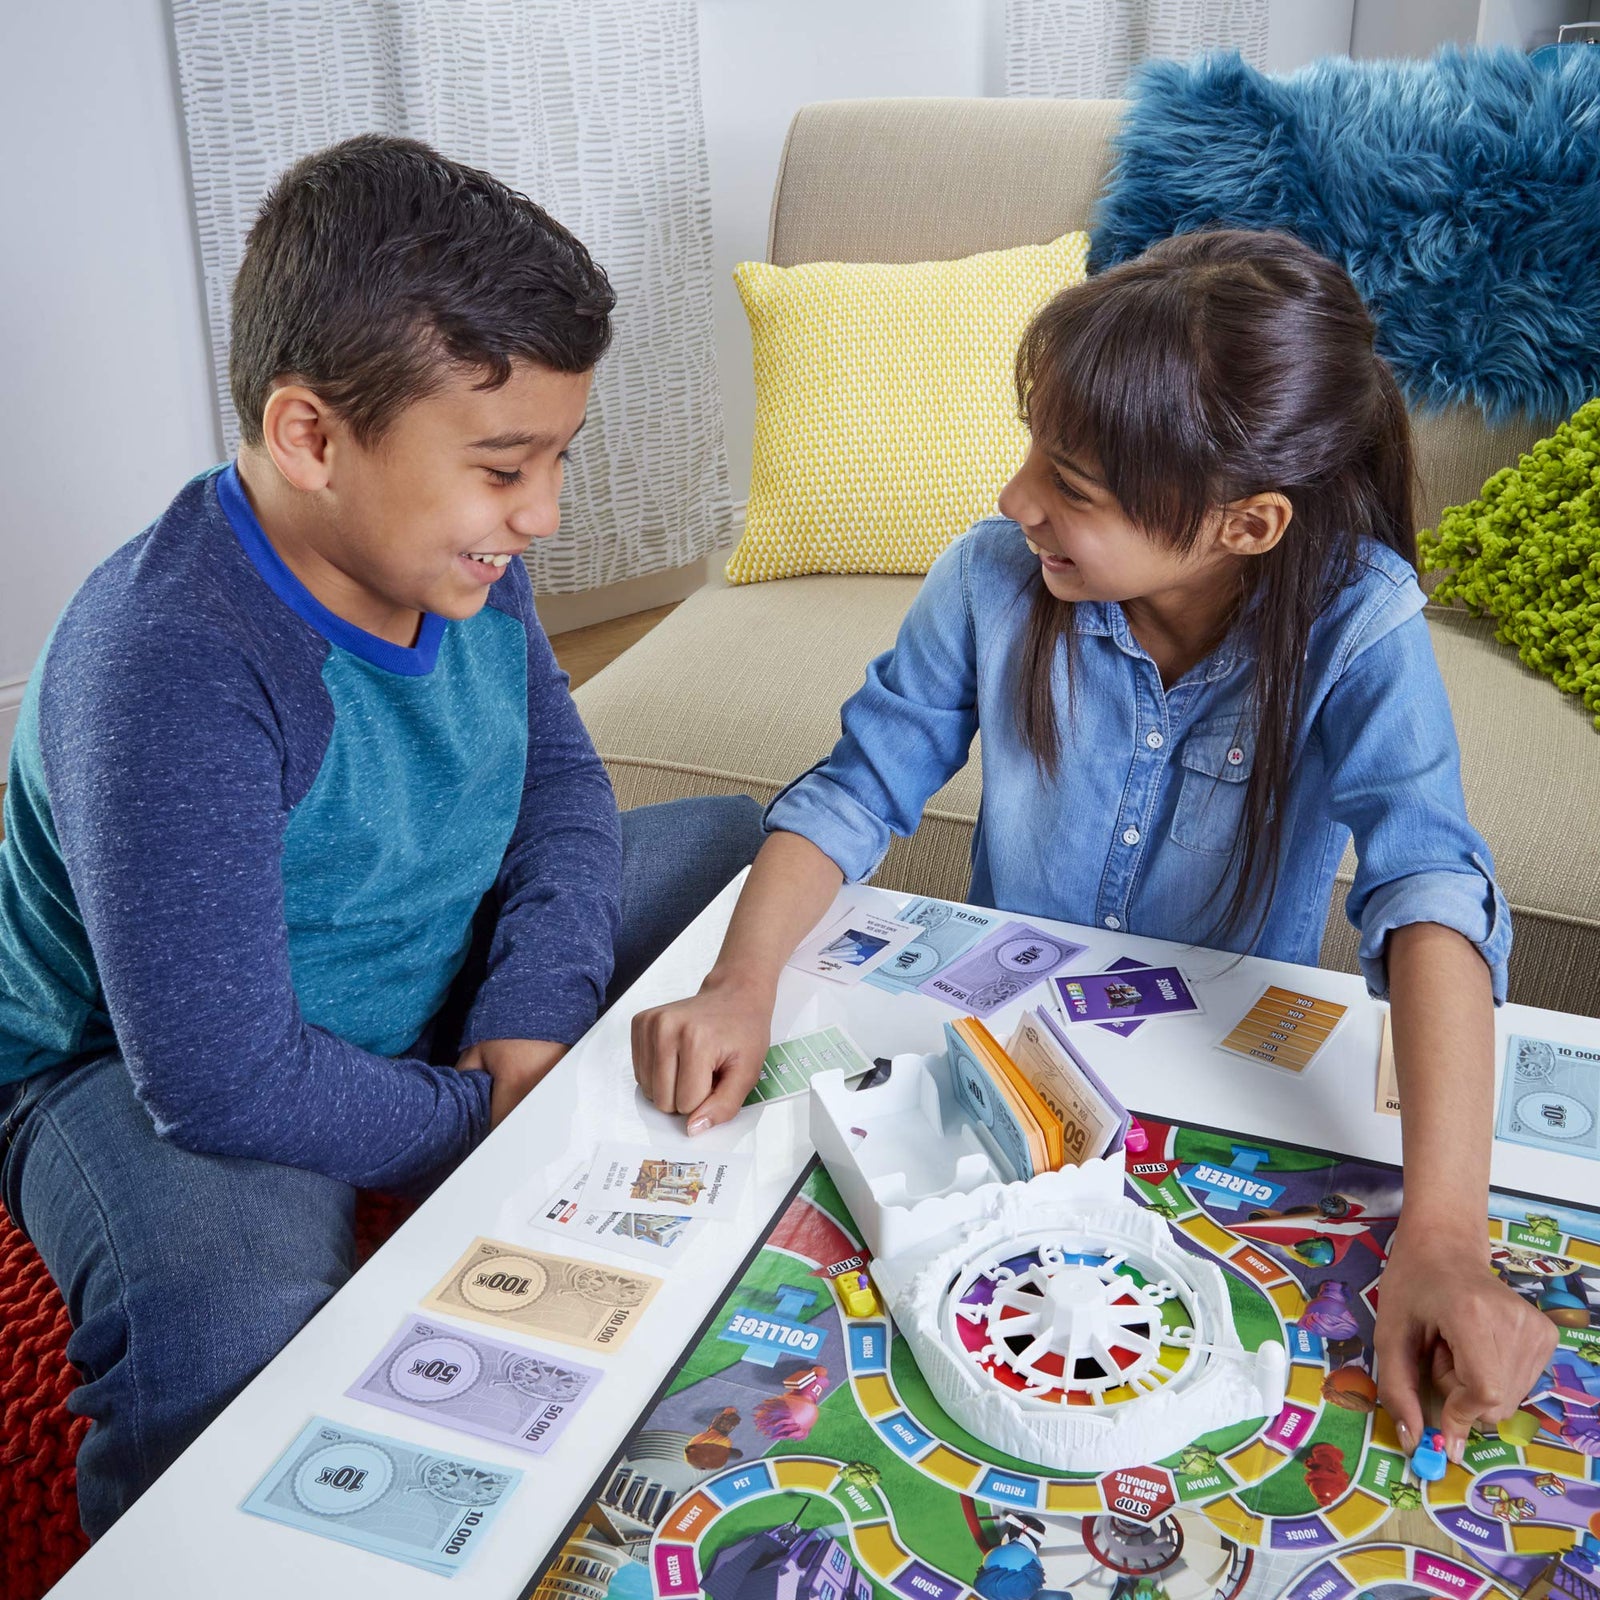 Hasbro Gaming The Game of Life Game, Family Board Game for 2-4 Players, Indoor Game for Kids Ages 8 and Up, Pegs Come in 6 Colors